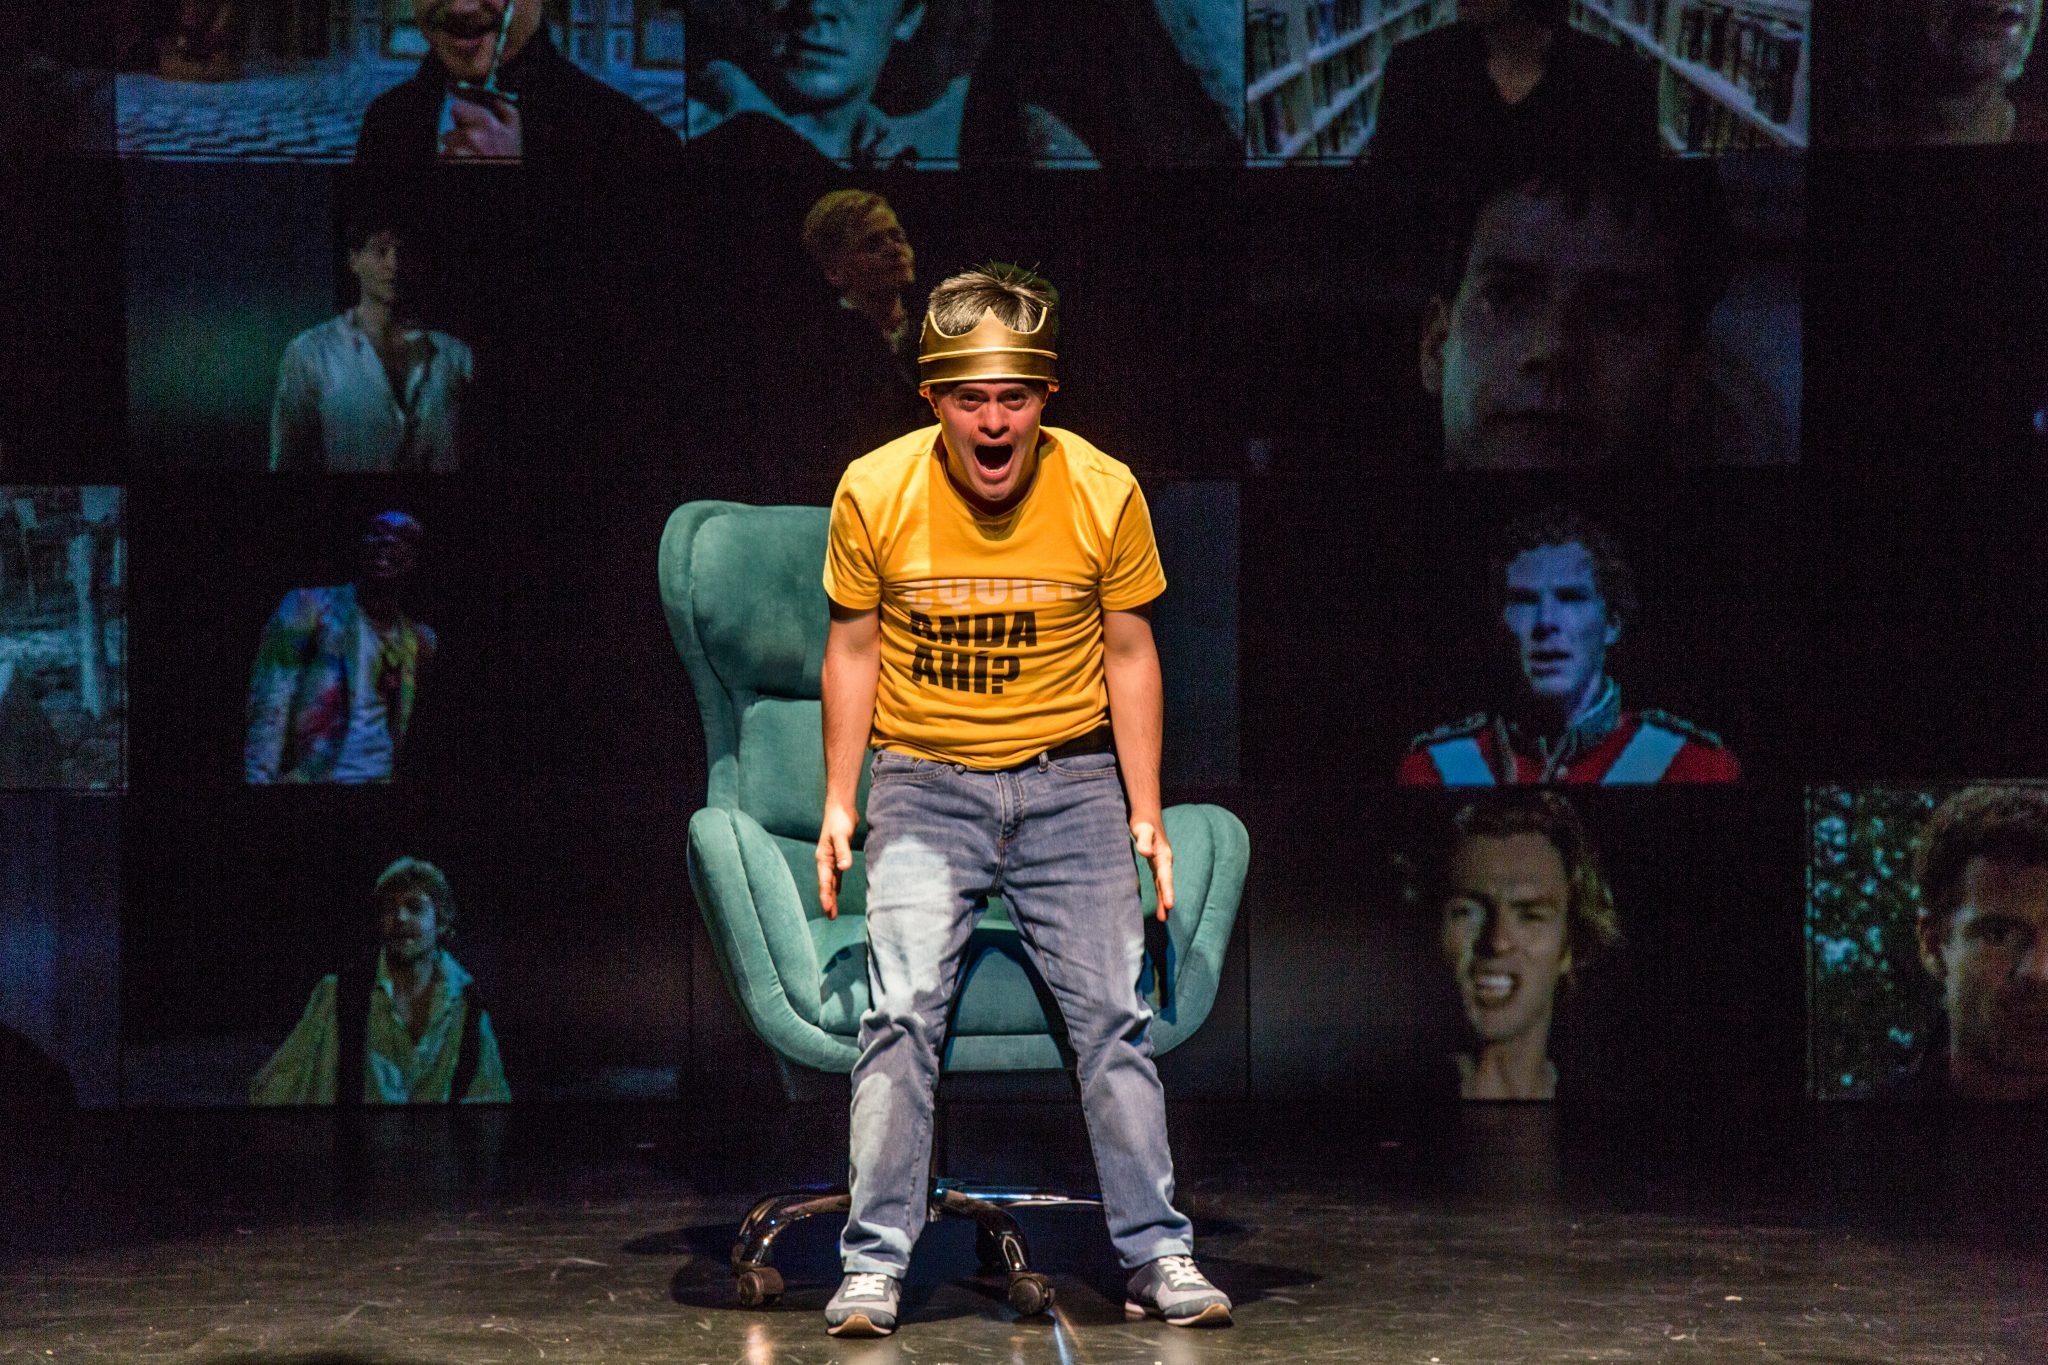 A still image from Hamlet. A performer stands on a stage in front of a teal armchair wearing a yellow t-shirt and blue jeans, with a heavy looking crown perched atop their head. They are facing the audience with their mouth open, as if caught in the middle of a passionate yell. Behind them is a large screen filled with multiple depictions of Shakespearian actors from movies and theatre.